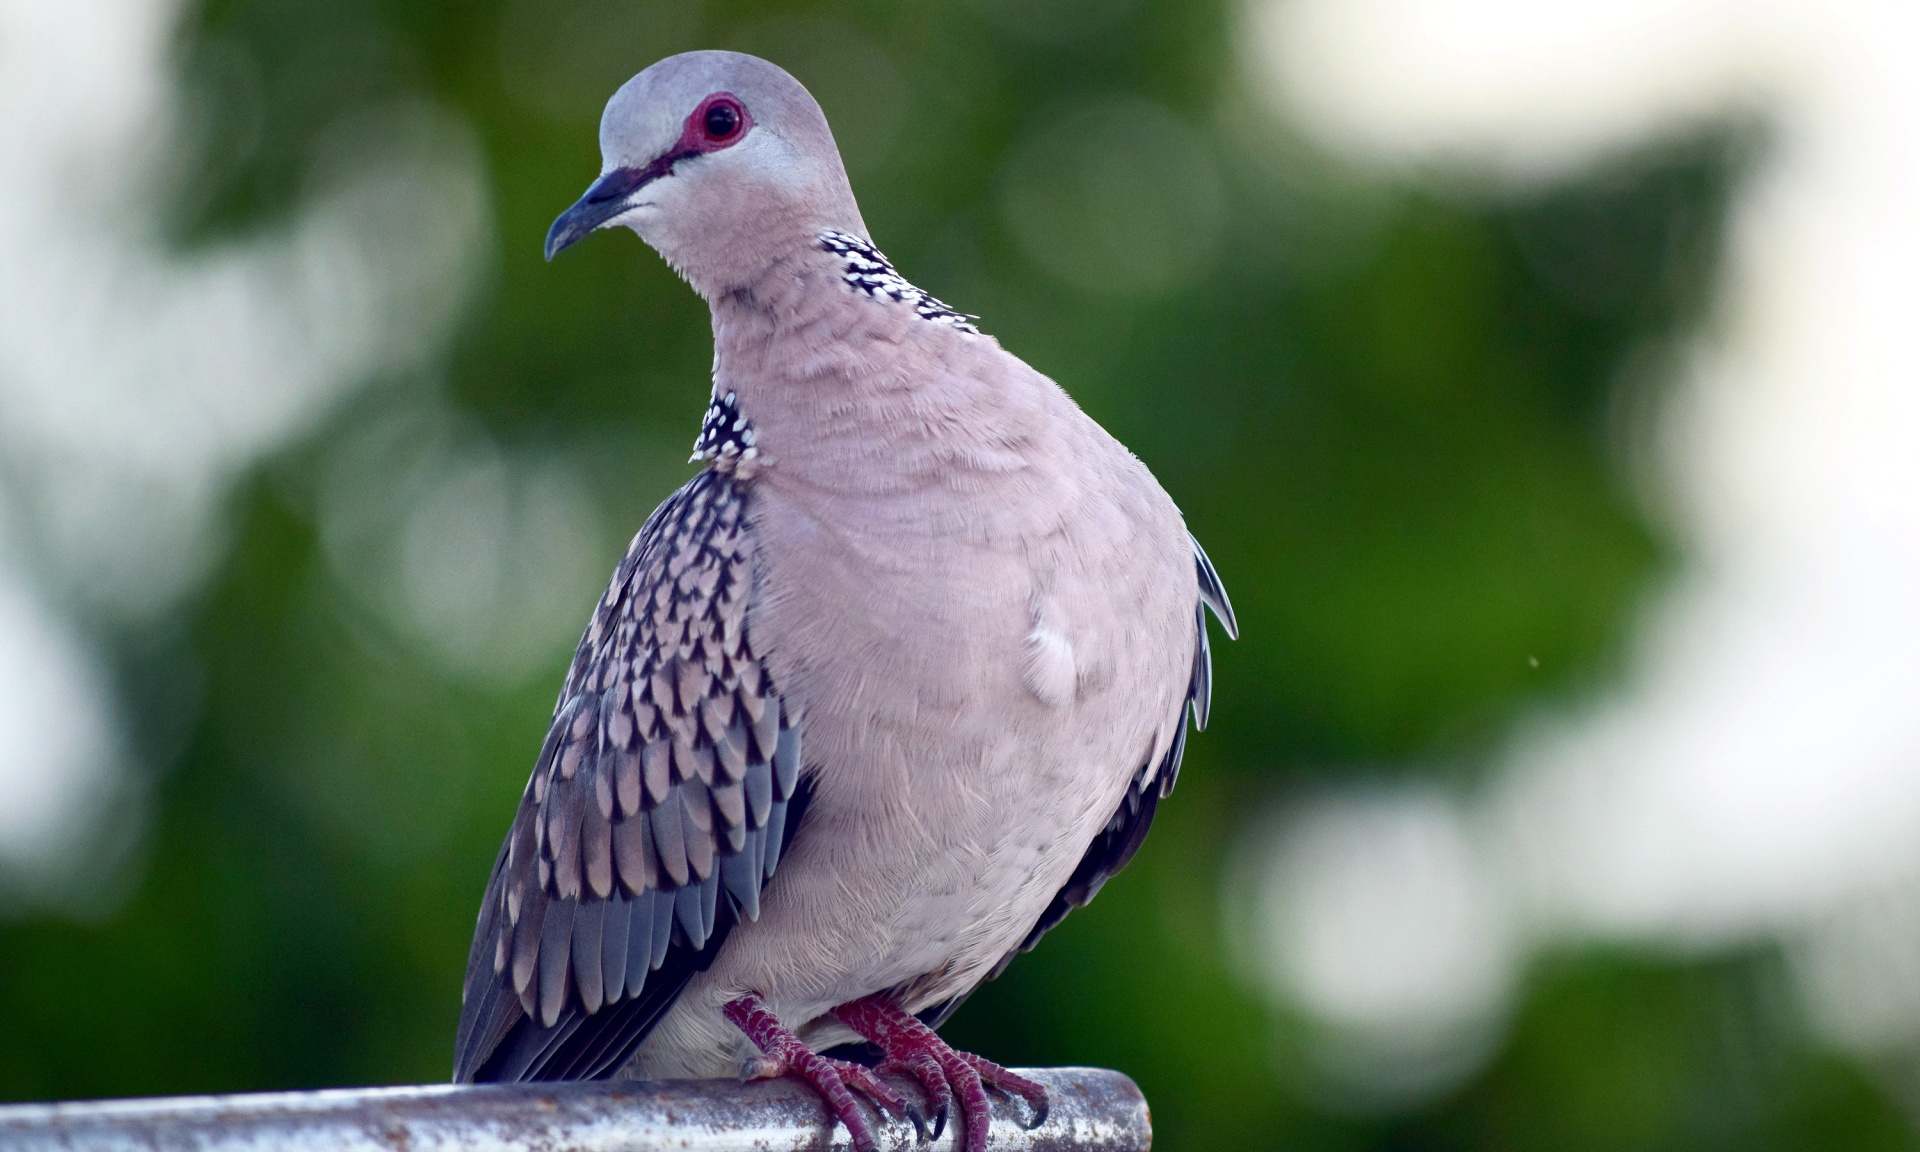 spotted dove bird free photo